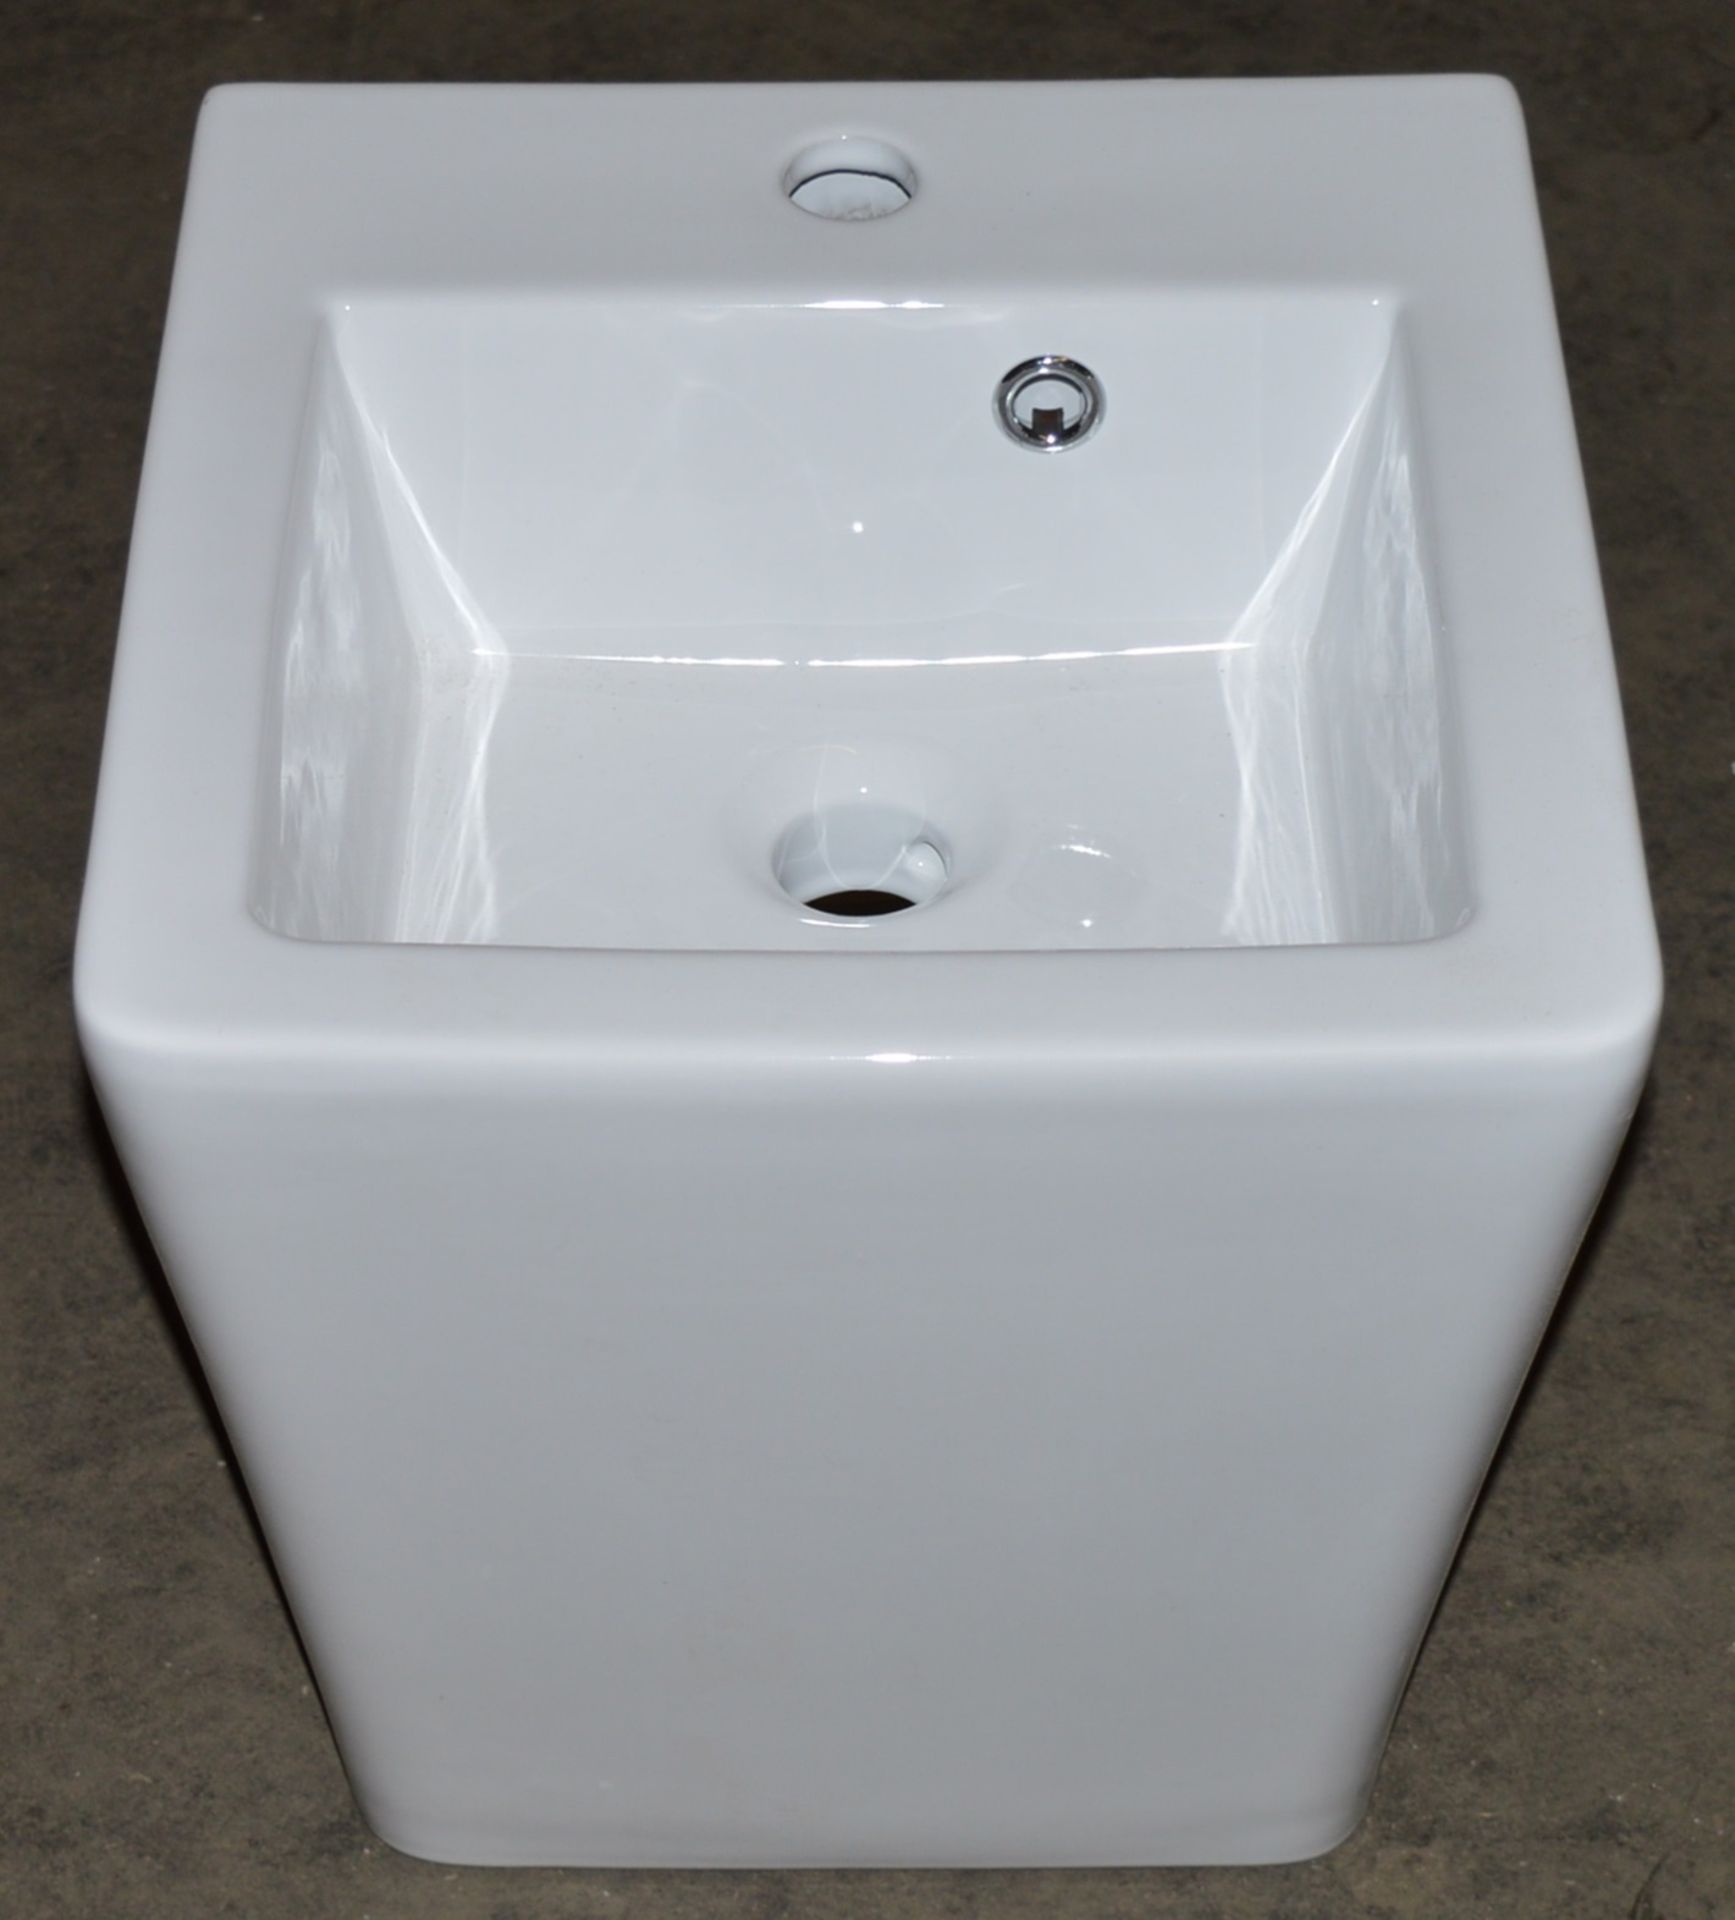 1 x Montreal Wall Hung Basin - Beautiful Angular Shape and Tapered Design - H40 x W37 x D40 cms - - Image 3 of 5